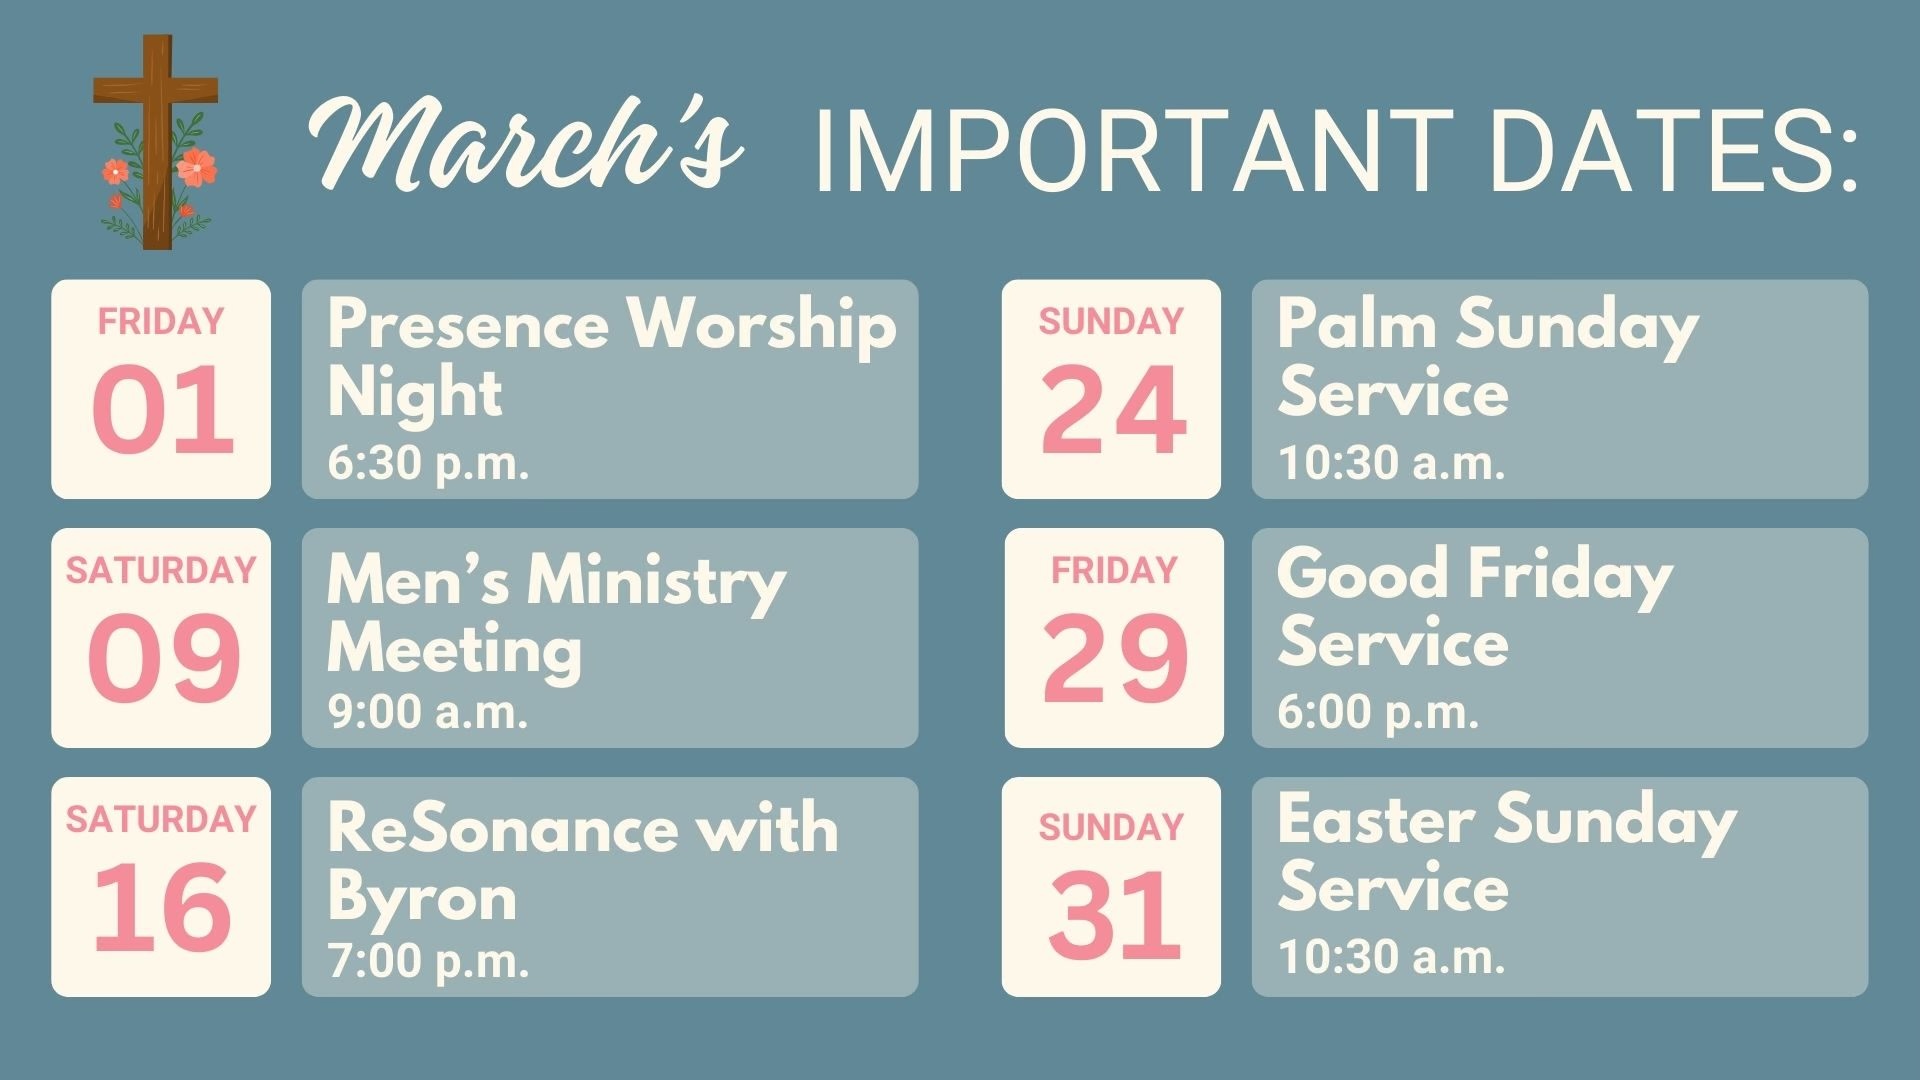 What’s Happening at Embrace in March